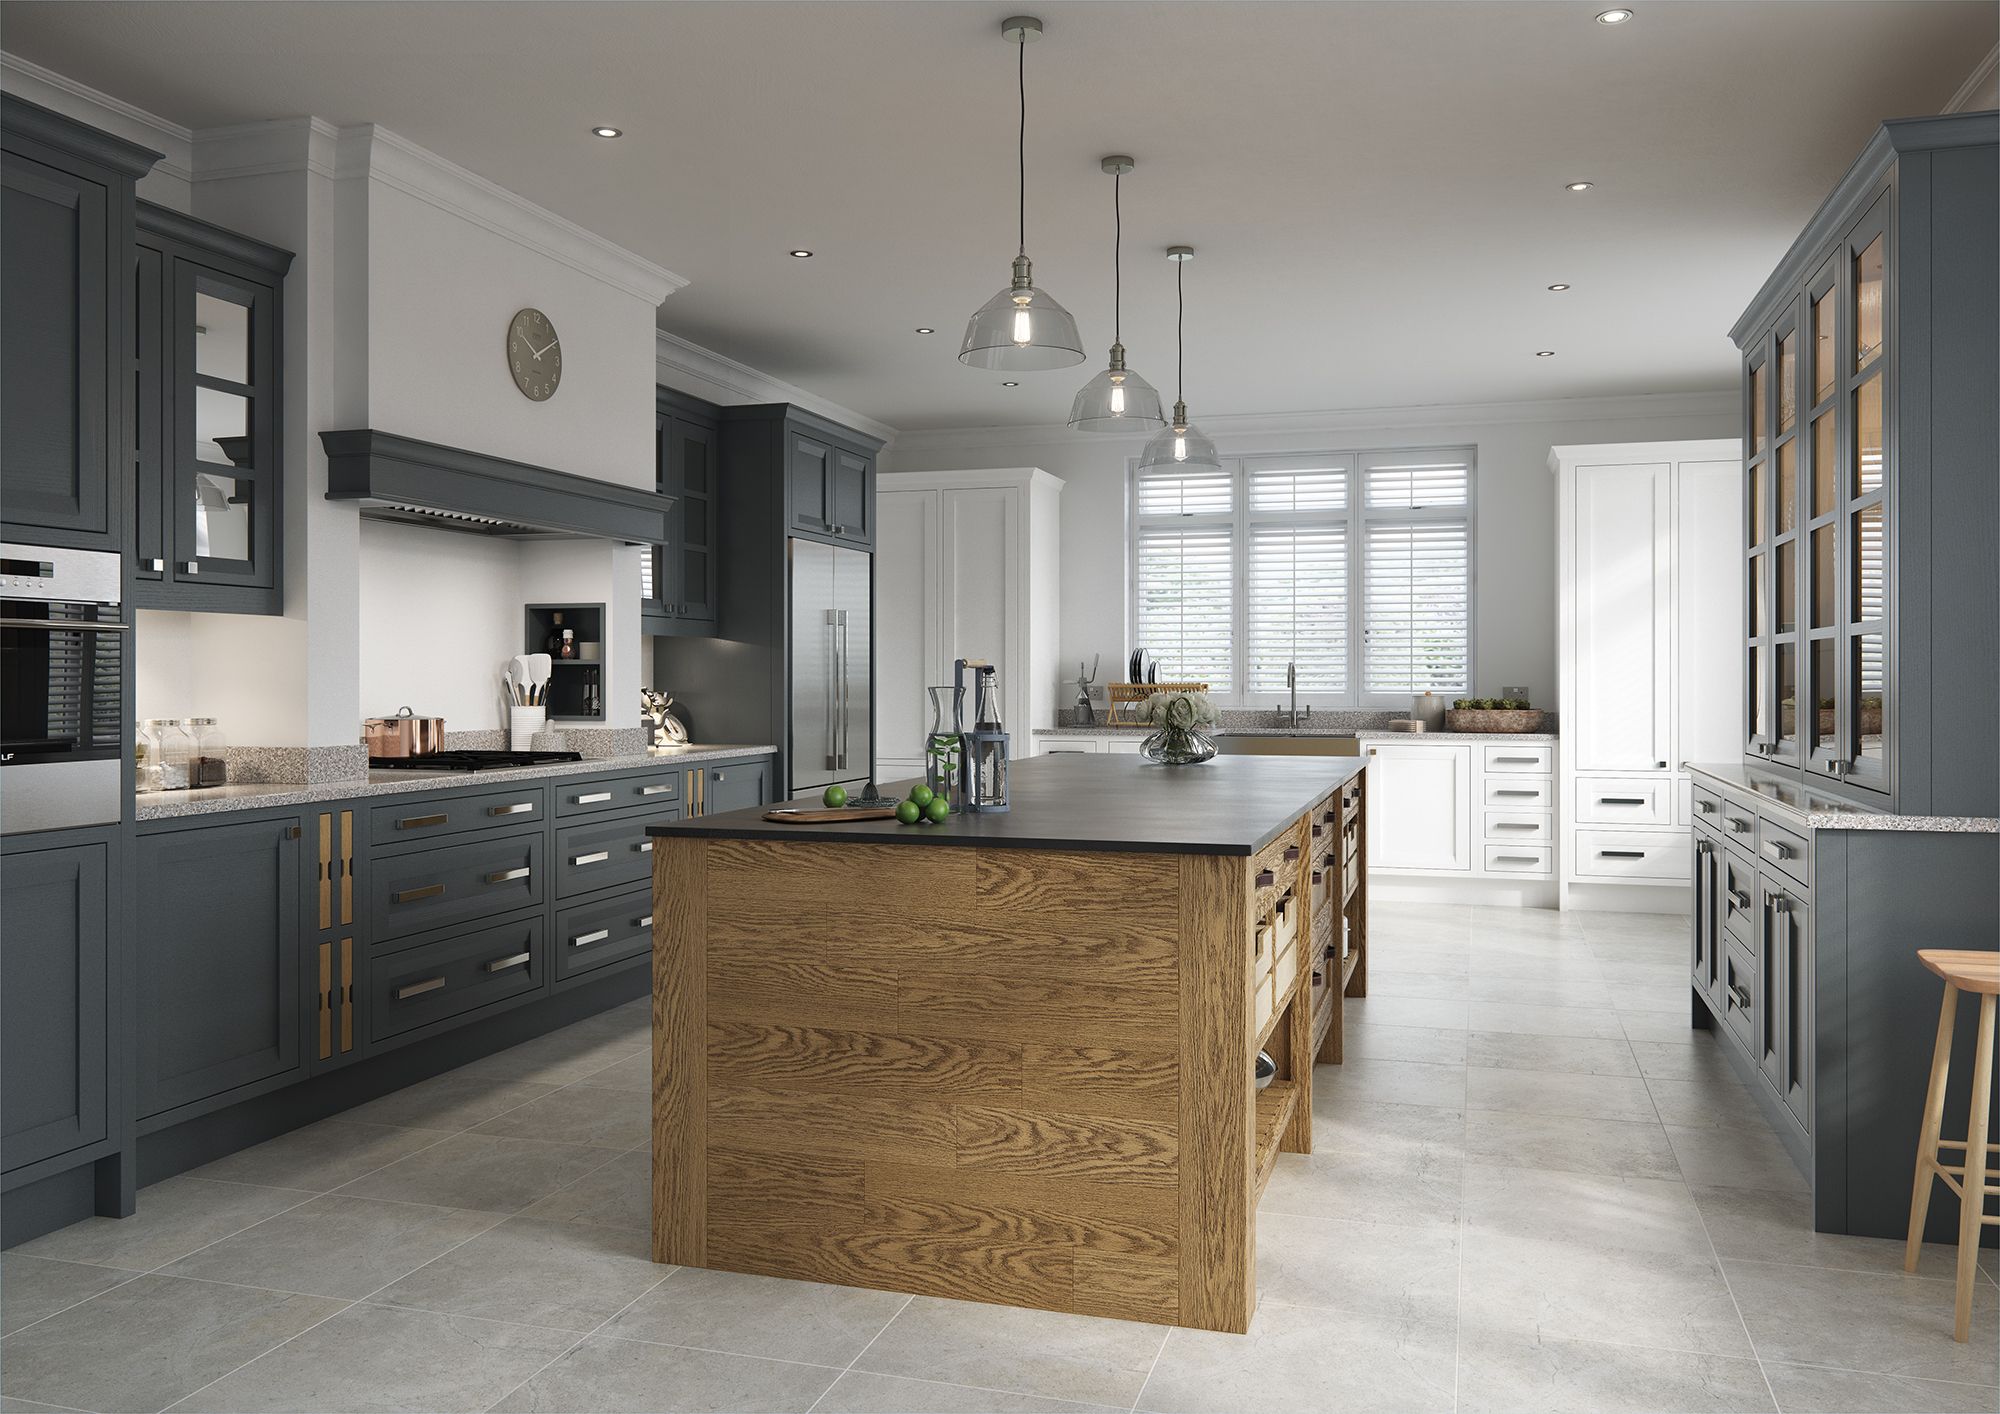 Chamfered Shaker style, in-frame kitchen in painted and oak furniture.